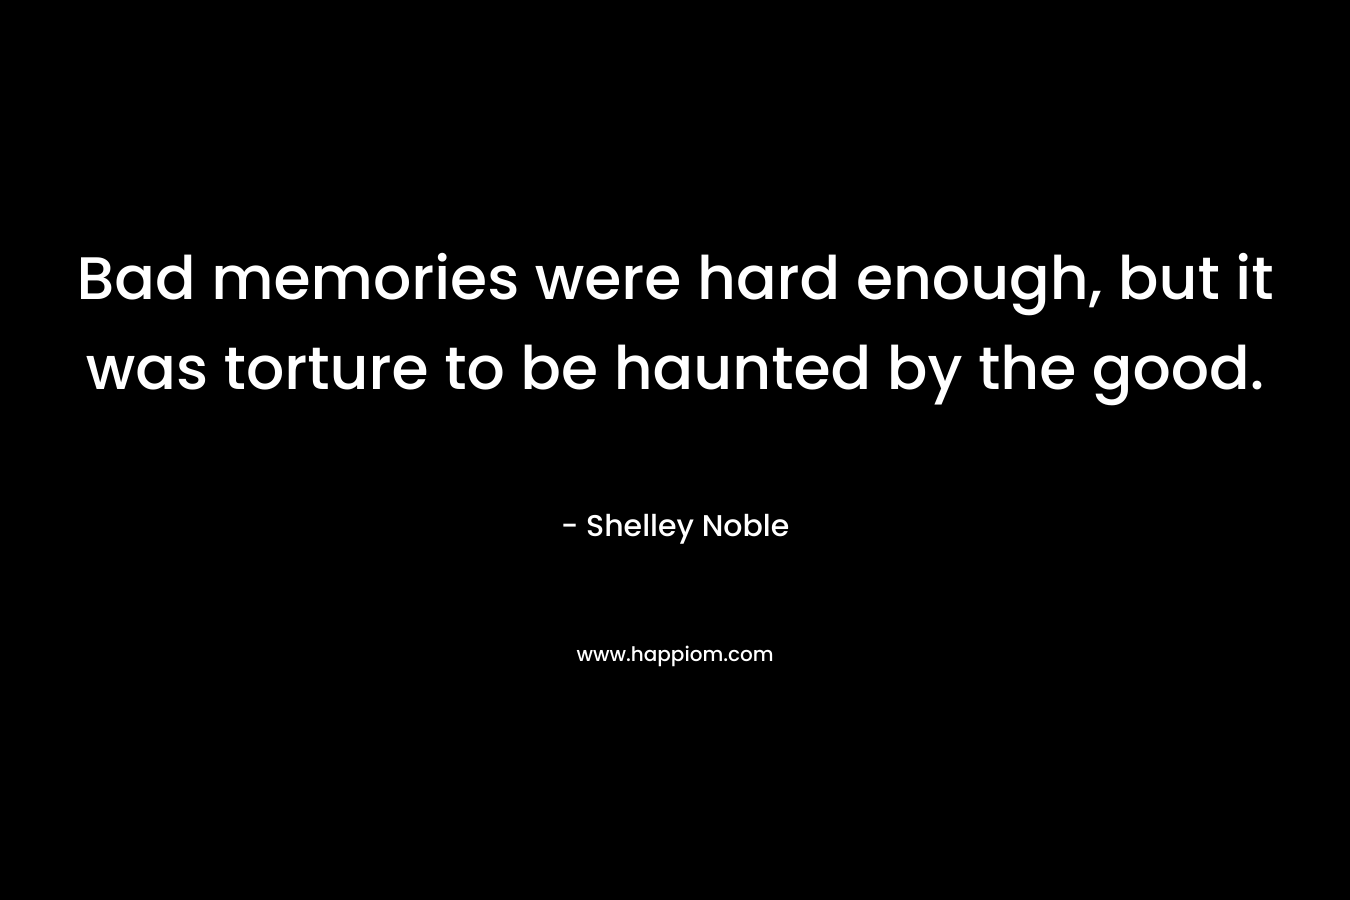 Bad memories were hard enough, but it was torture to be haunted by the good. – Shelley Noble